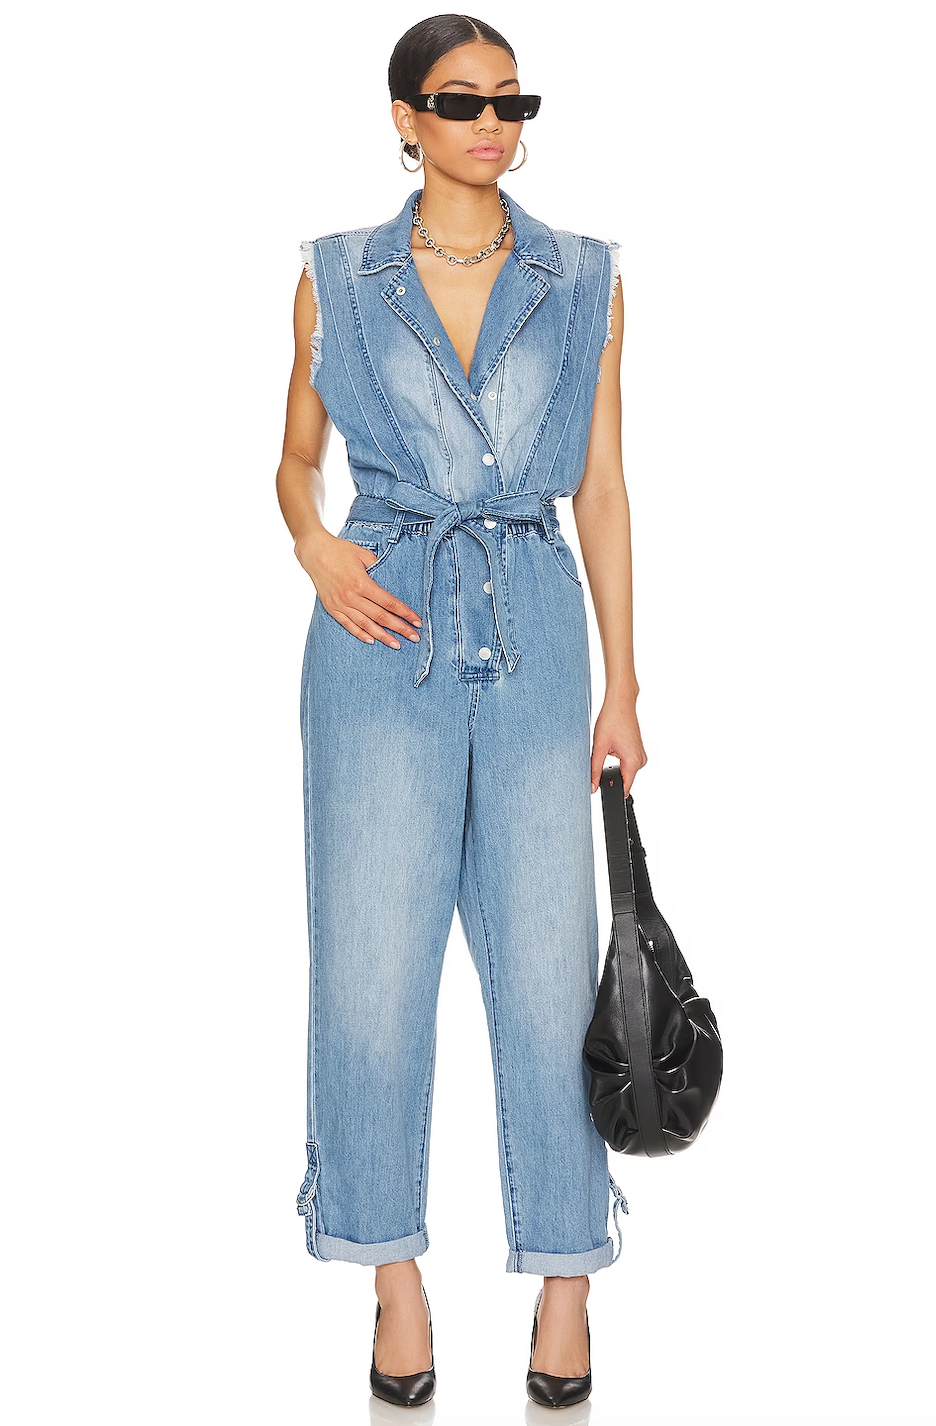 Denim Reloaded: Discover the Hottest Non-Jean Styles Taking Over the Fashion Scene